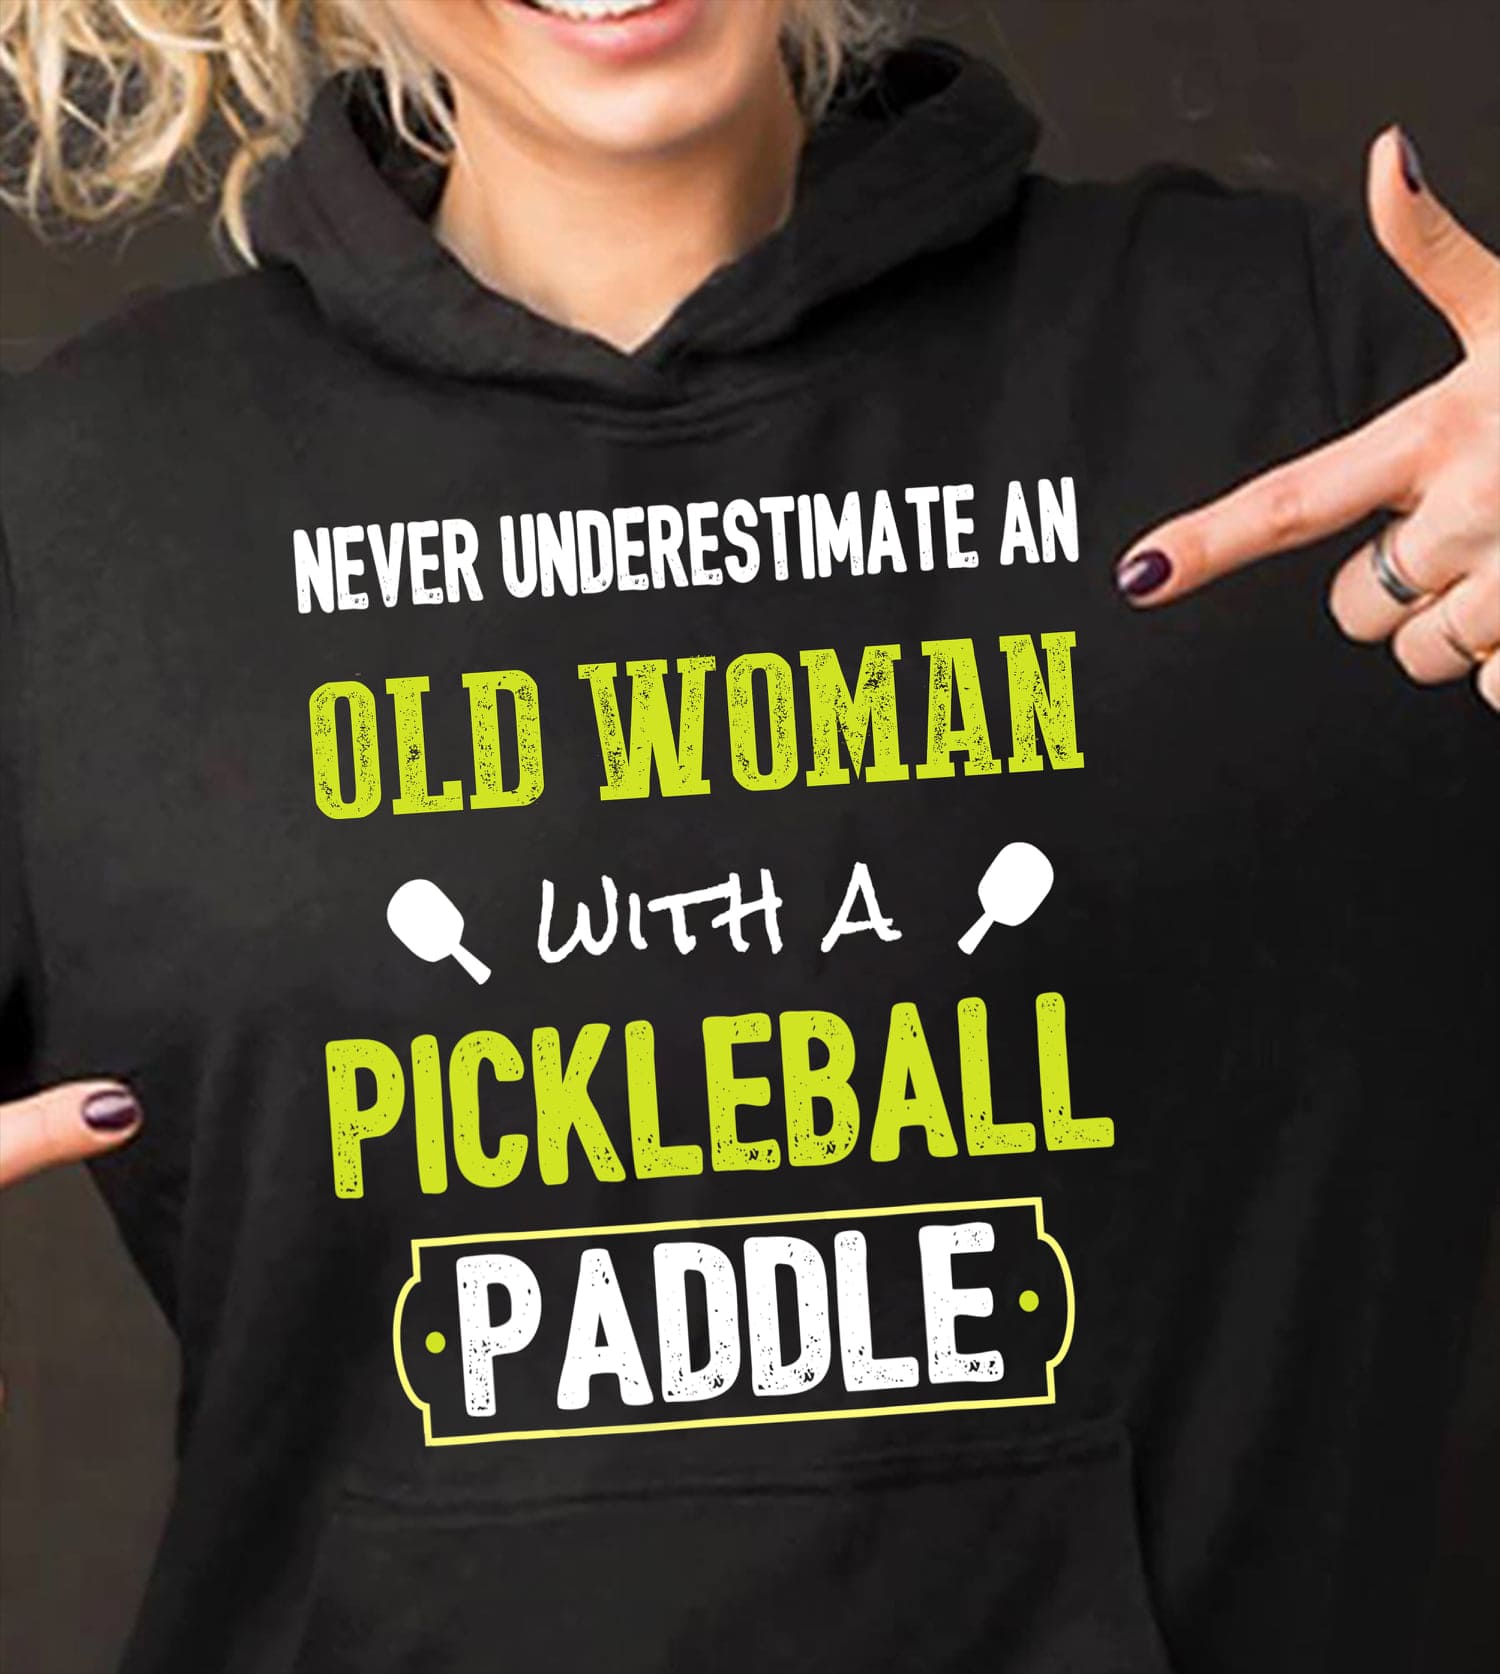 Never underestimate an old woman with a pickleball paddle